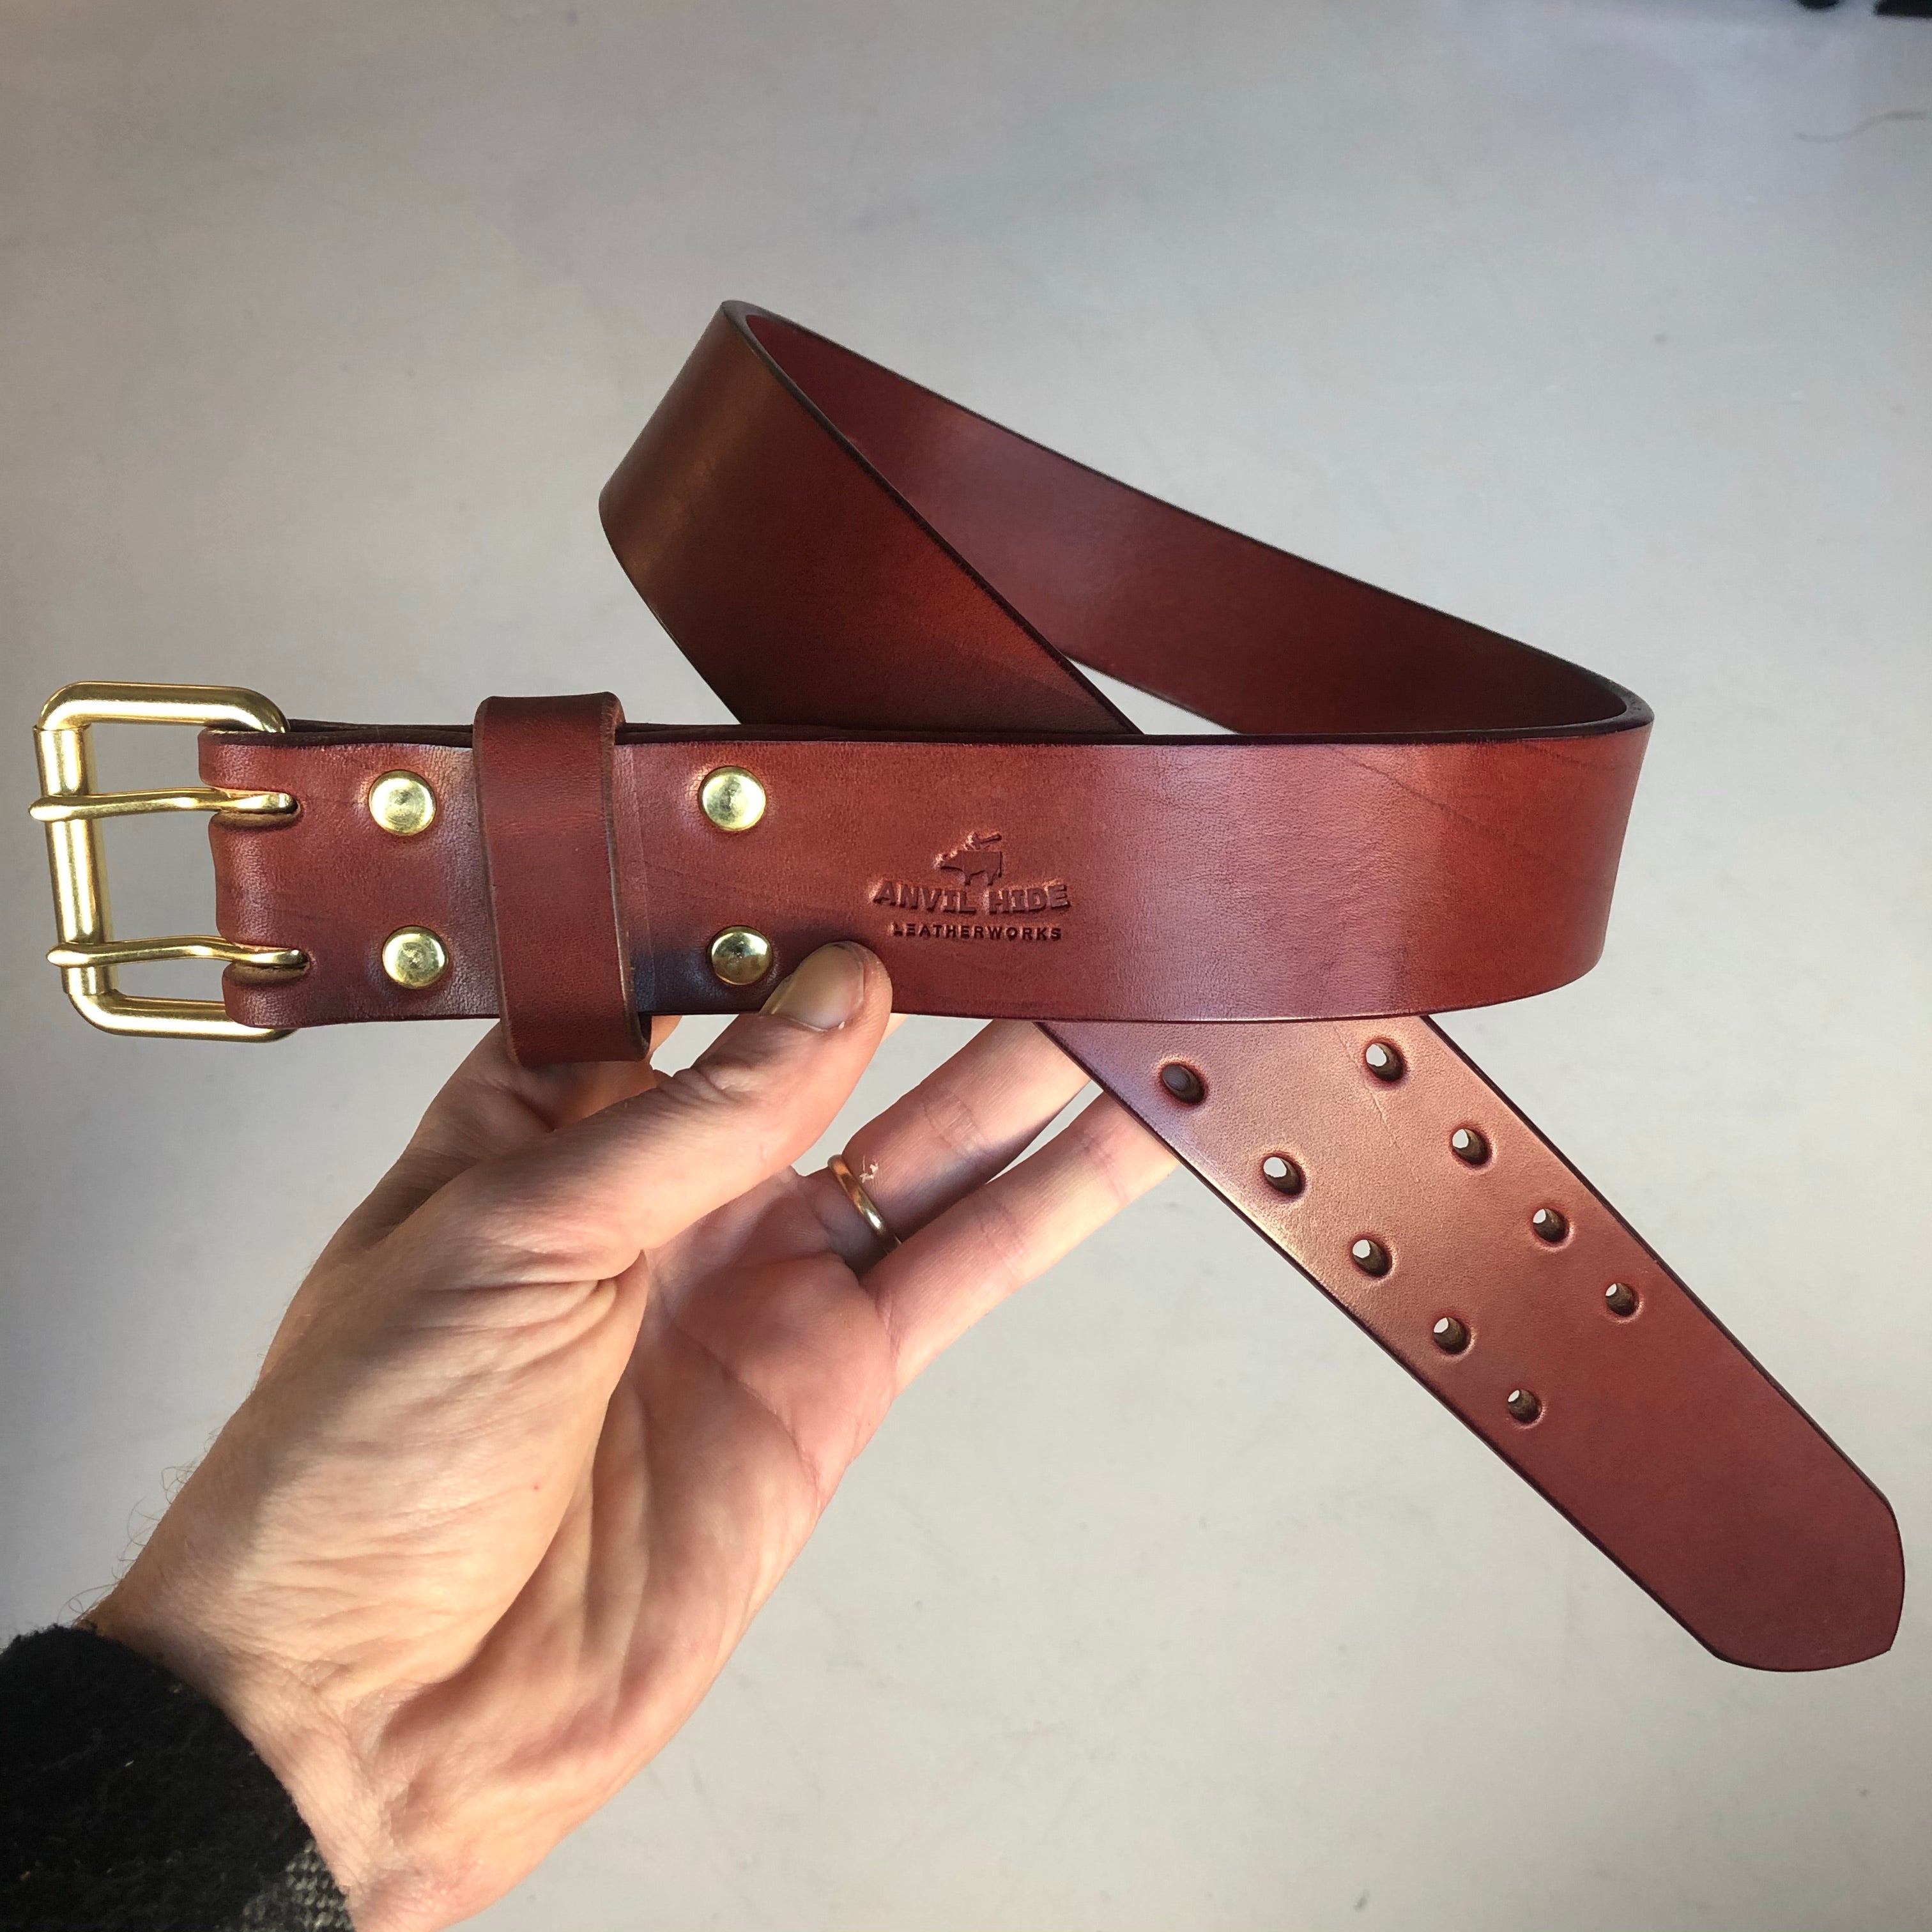 Hidn - The Handmade Bridle Leather Belt With A Secret Compartment